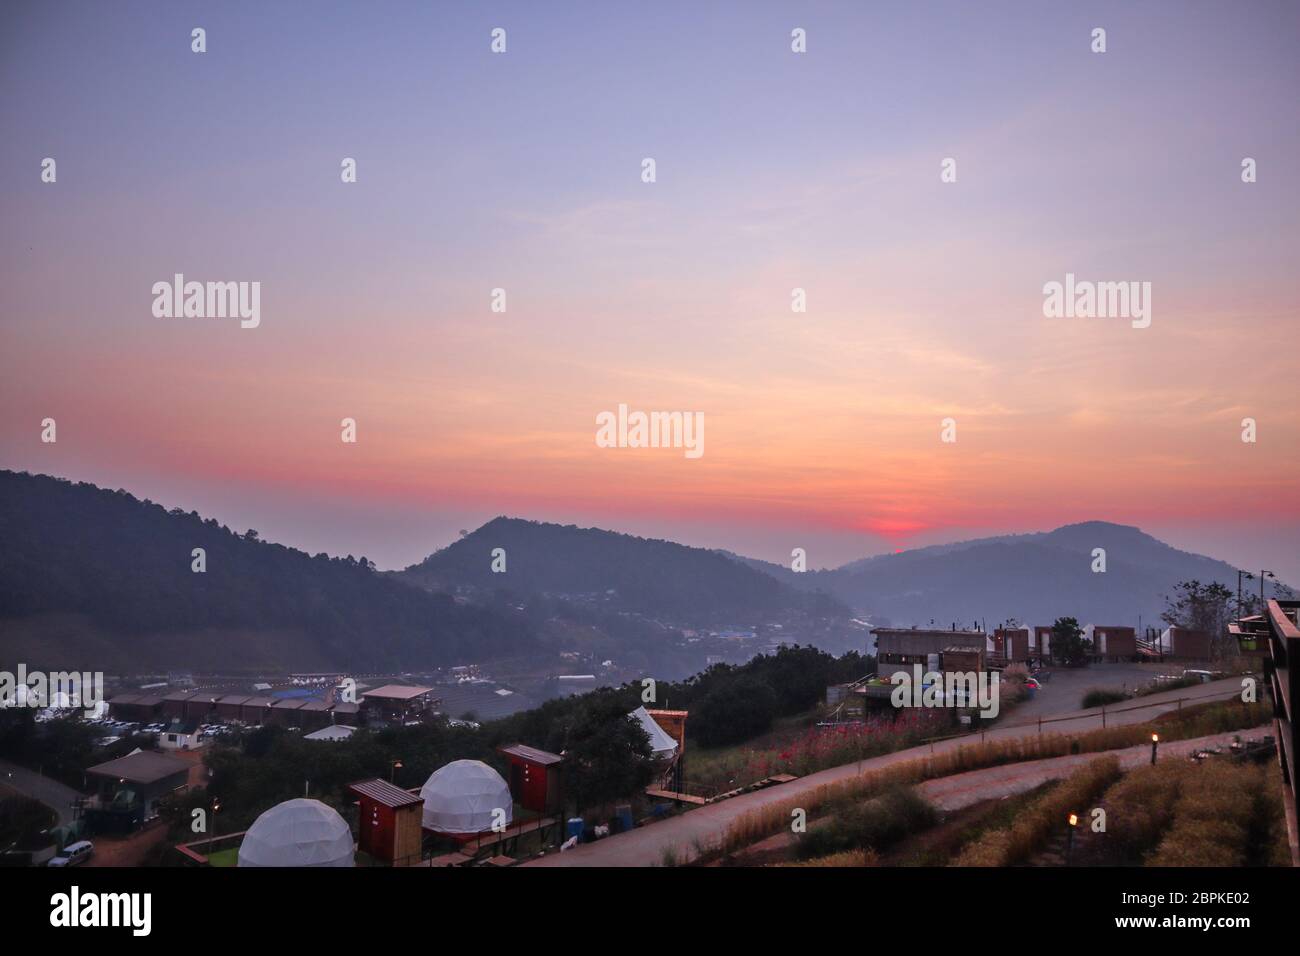 Mountain sunset in a thai village near mountains in Chiang Mai Stock Photo